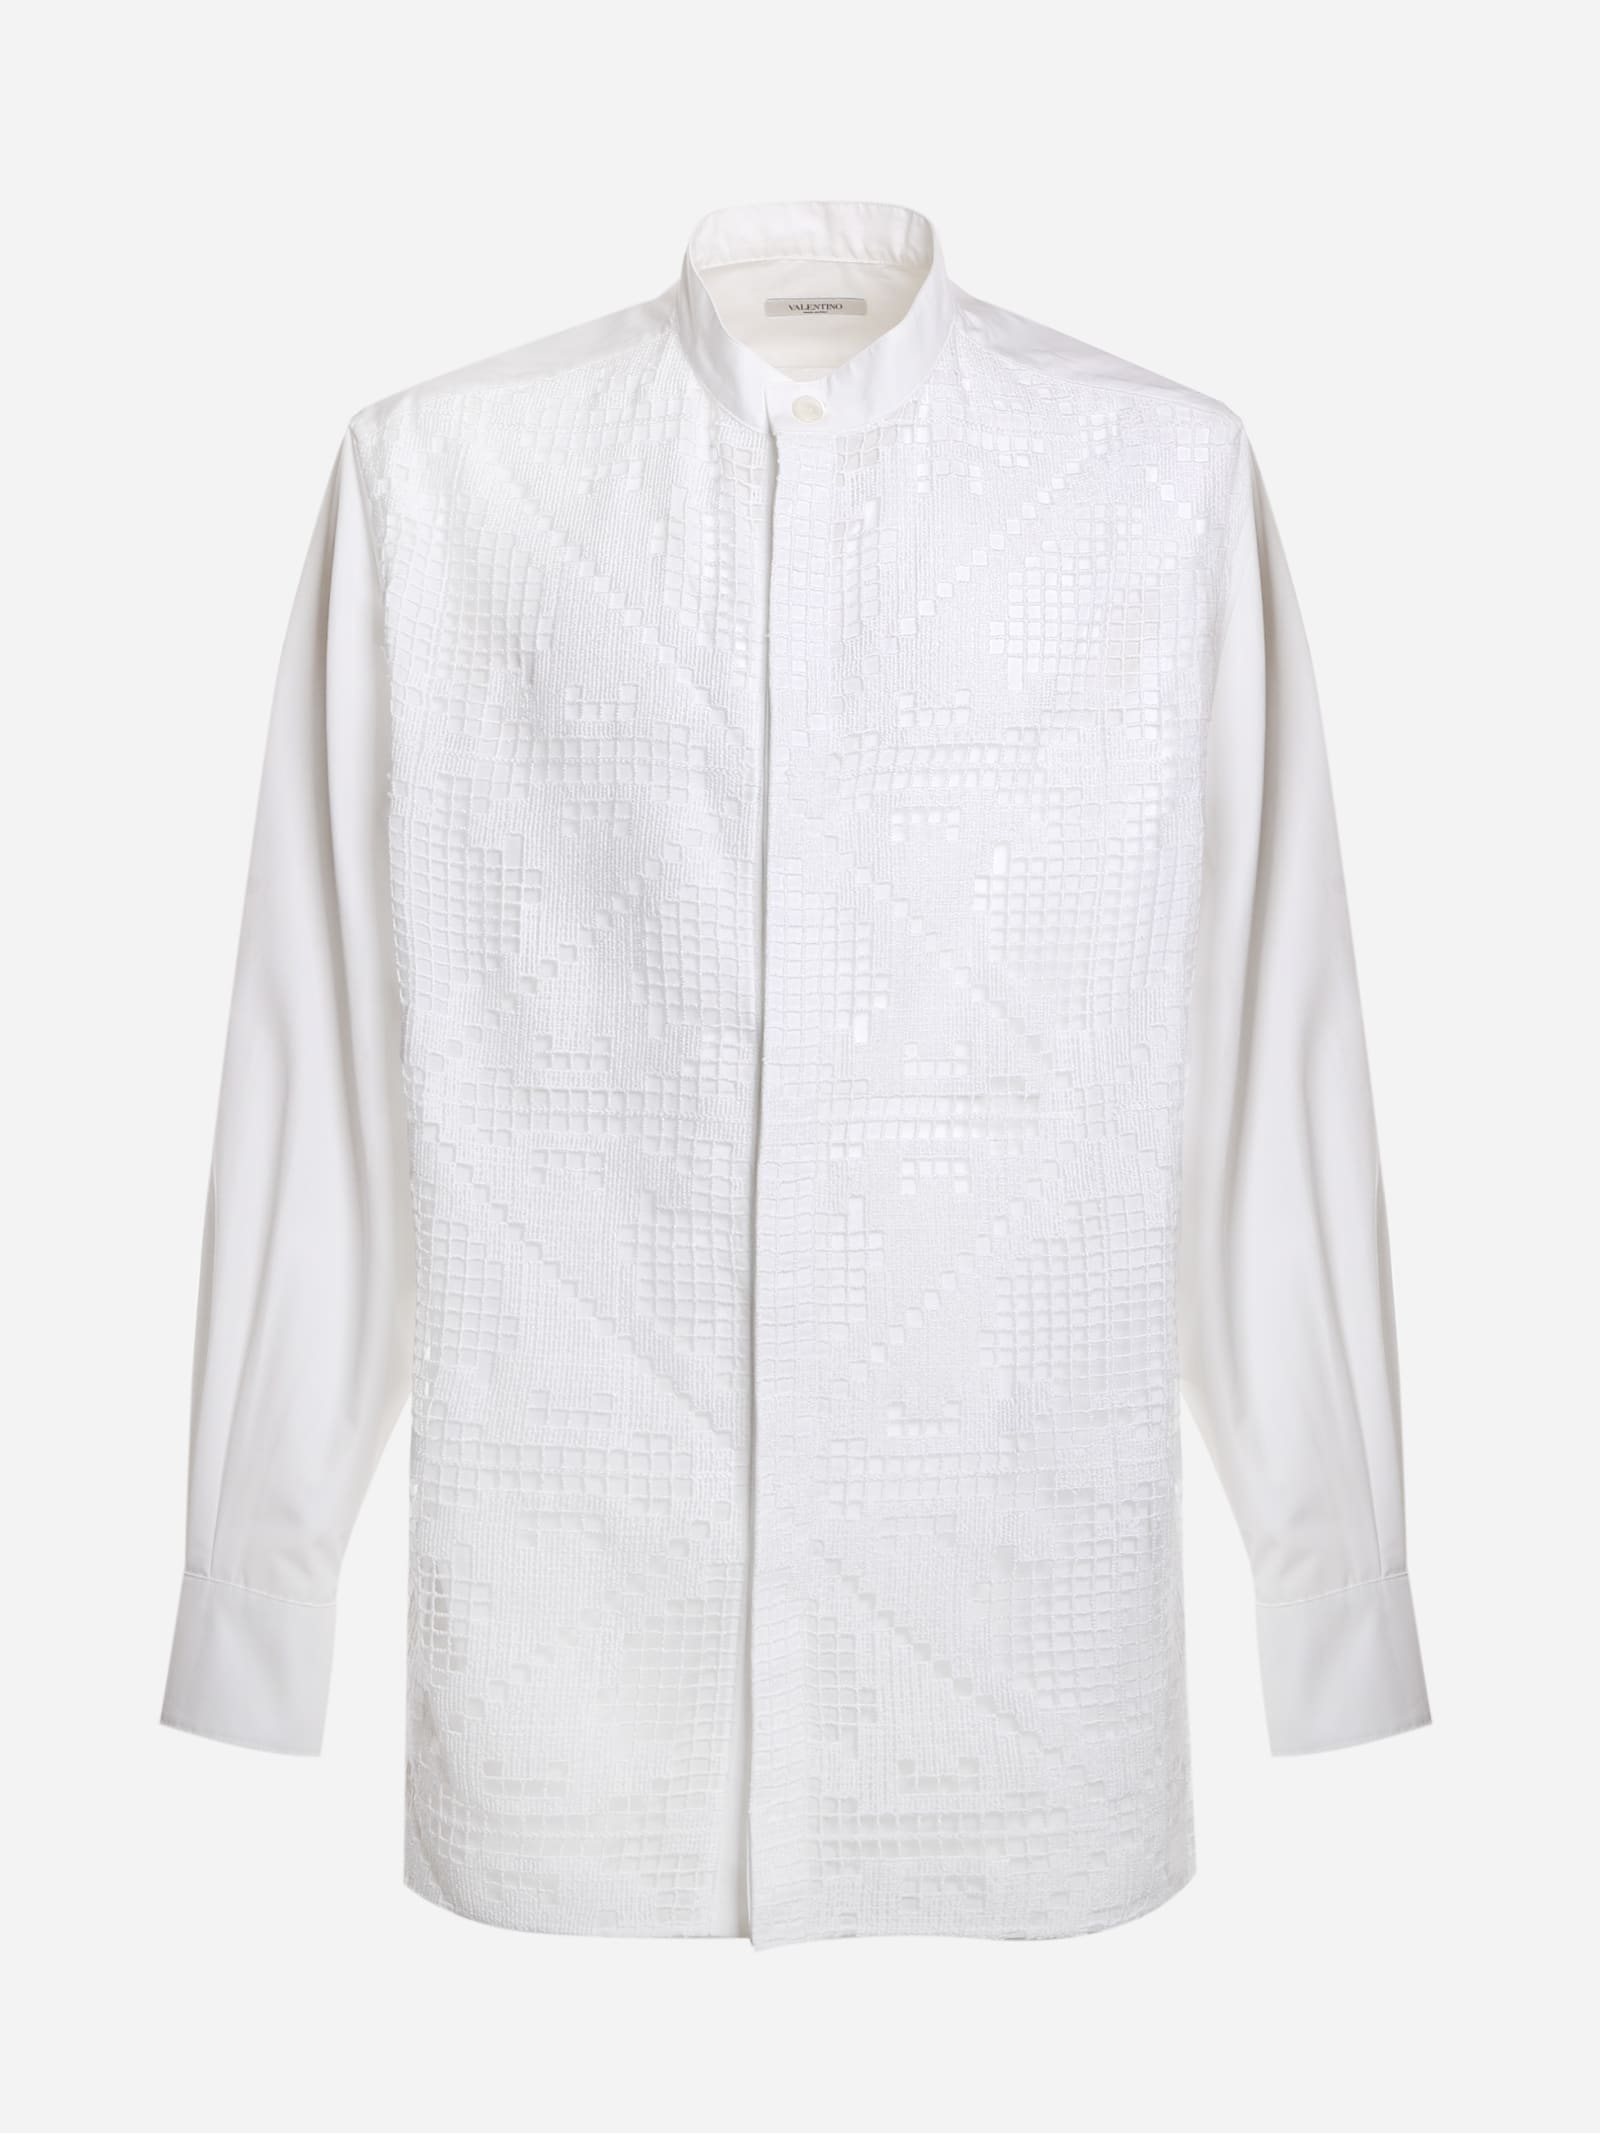 Valentino Cotton Shirt With Perforated Lace Inserts